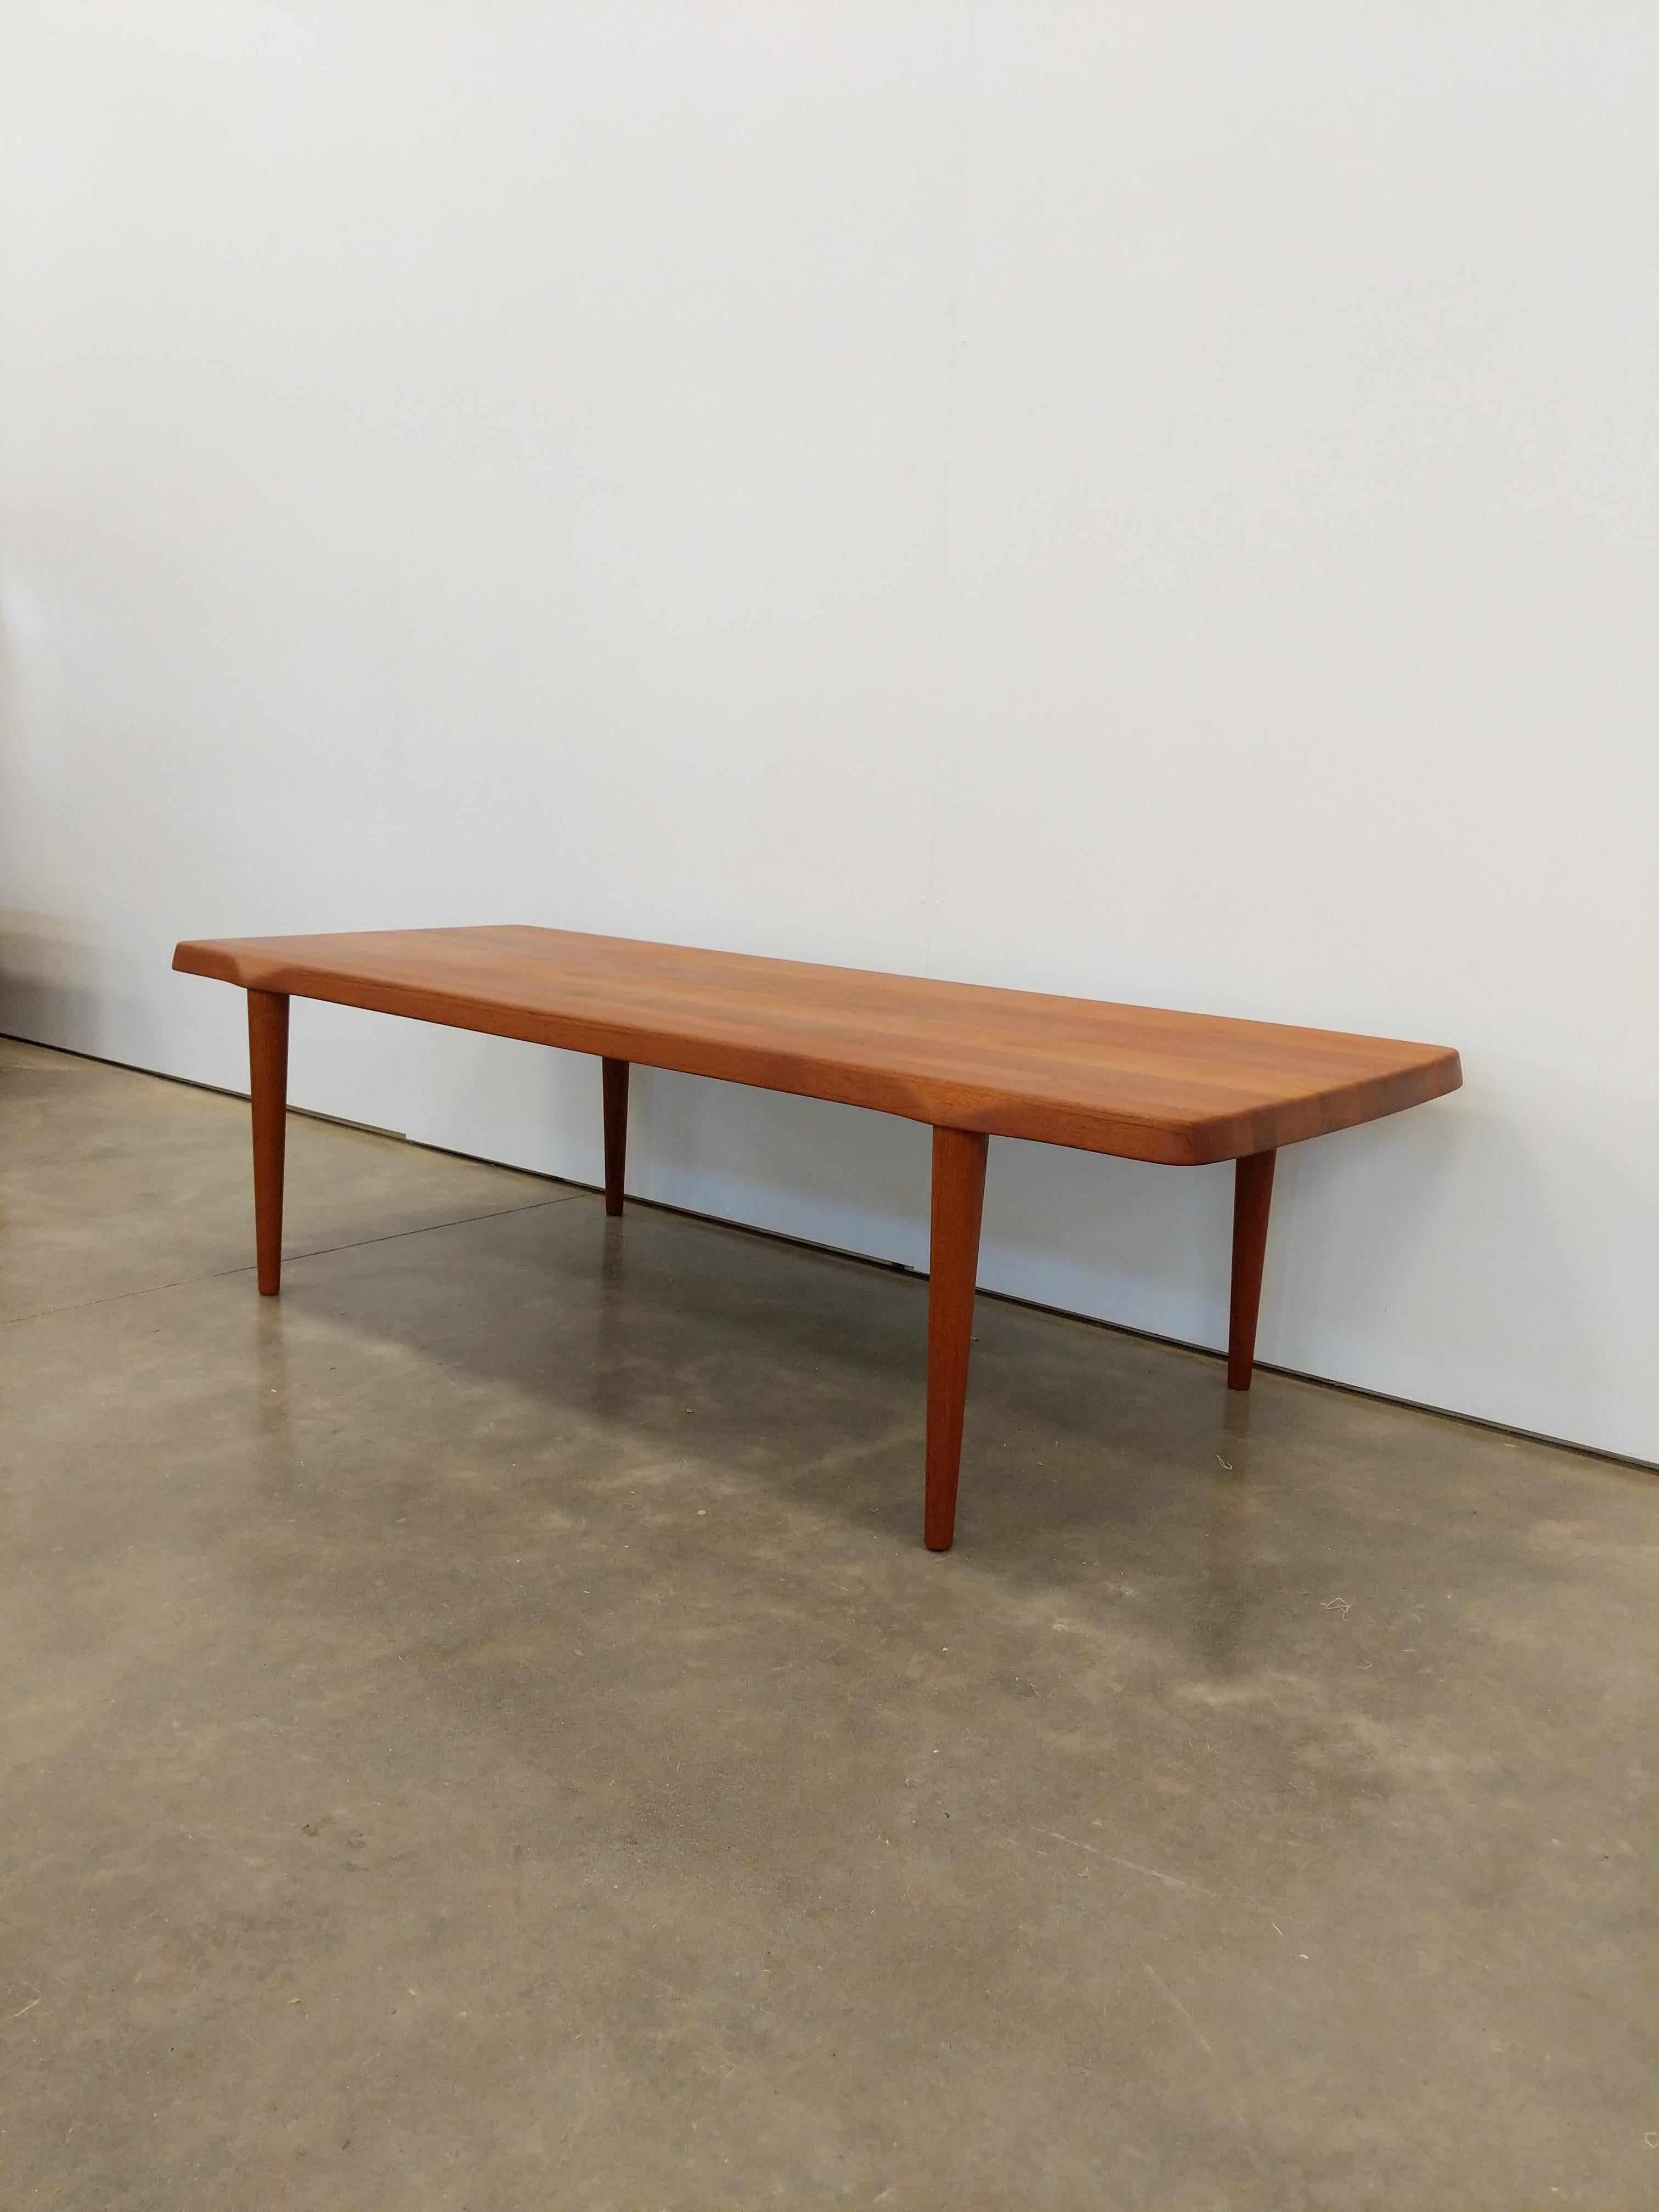 Authentic vintage mid century Danish / Scandinavian Modern teak coffee table.

This table is solid teak.

This piece is in excellent refinished condition with very few signs of age-related wear (see photos).

If you would like any additional